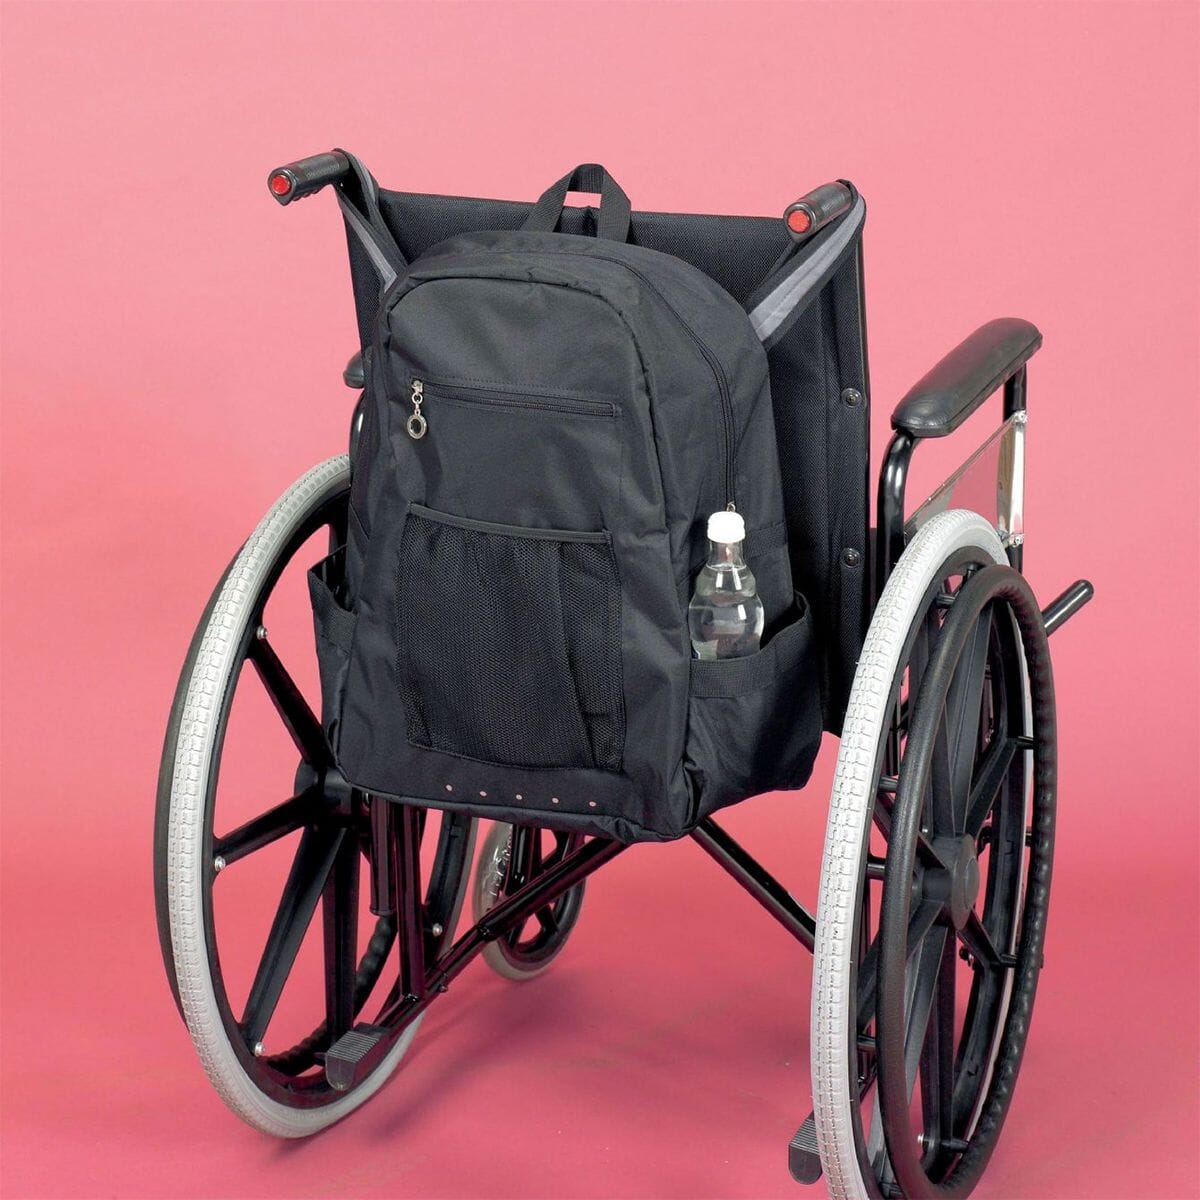 View Deluxe Wheelchair Bag information